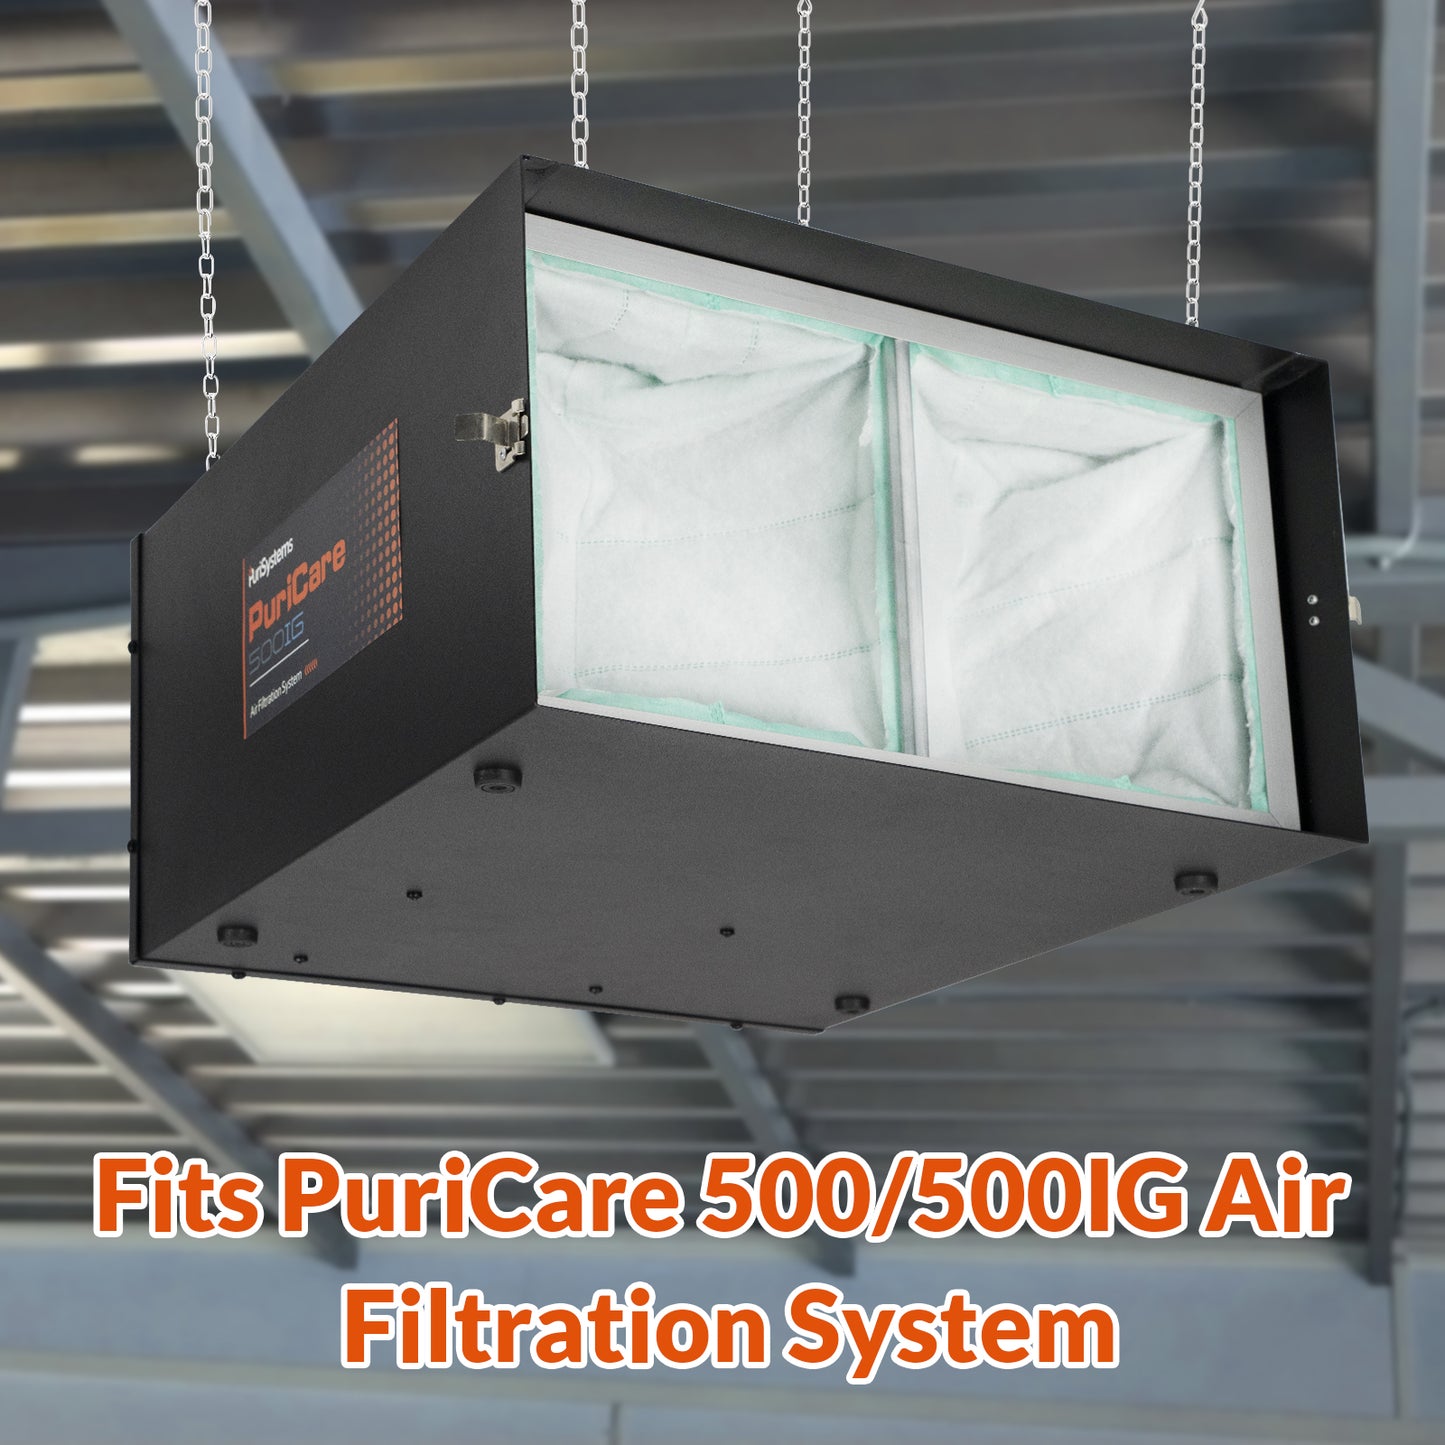 Purisystems 1-Micron Inner Air Filters for the PuriCare 500IG/500 Air Filtration System, 3-Pack